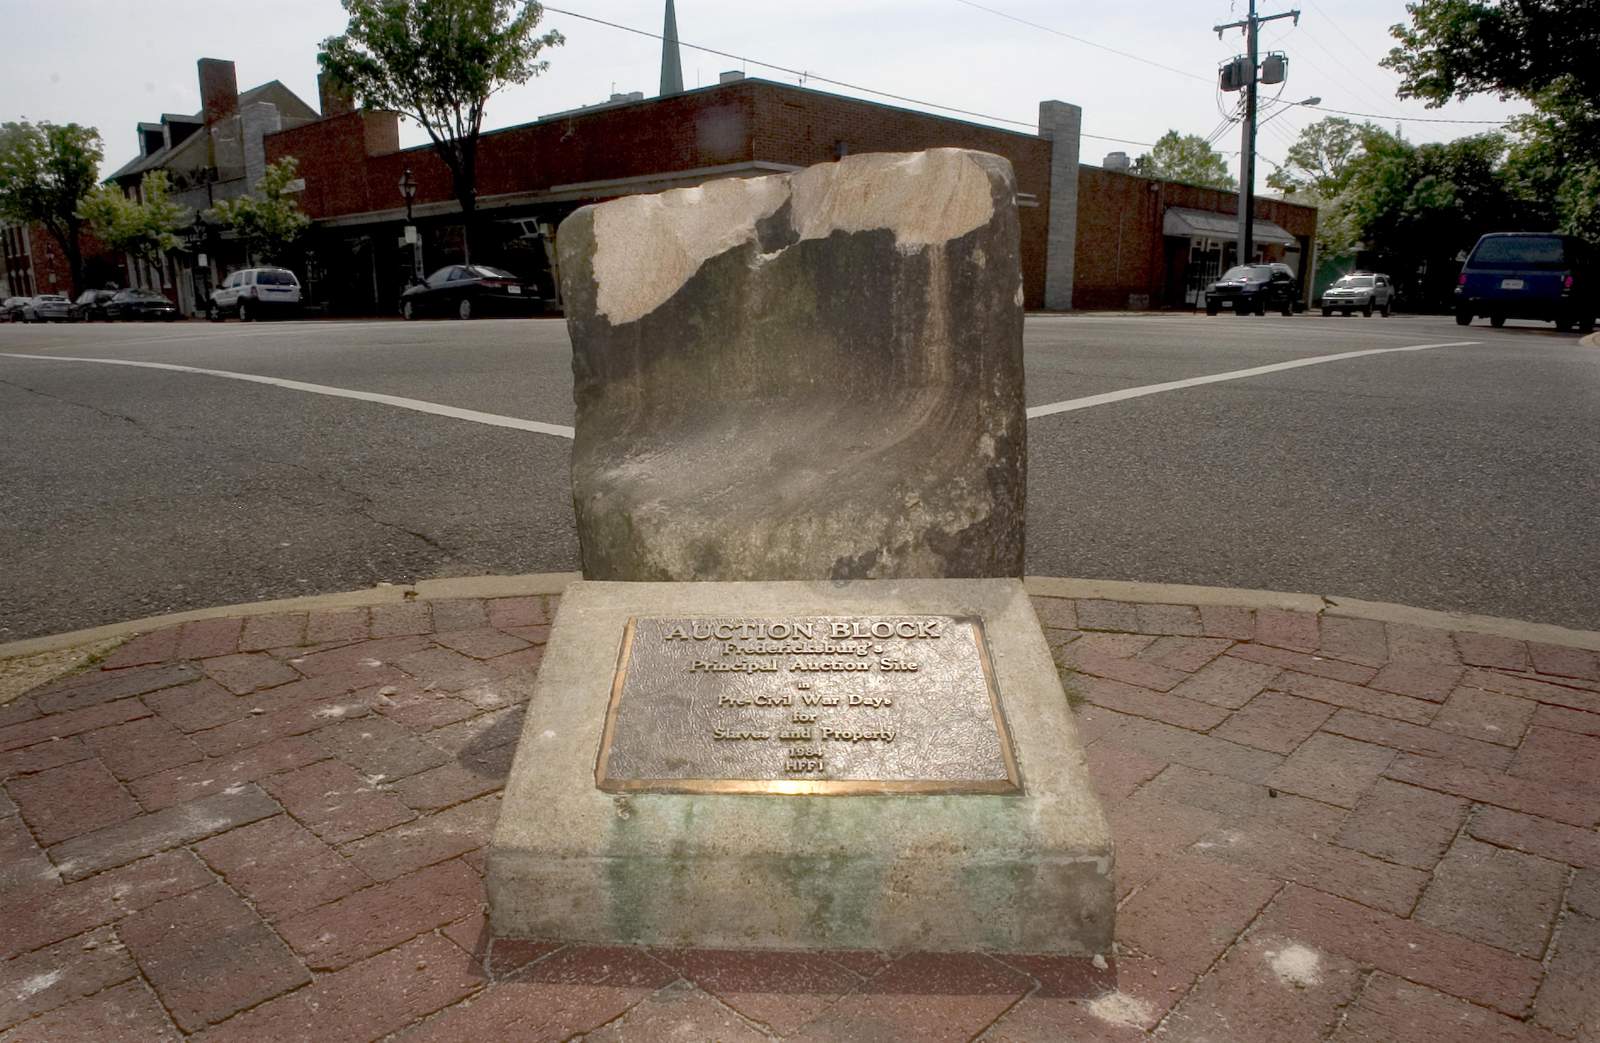 Virginia city removes 176-year-old slave auction block